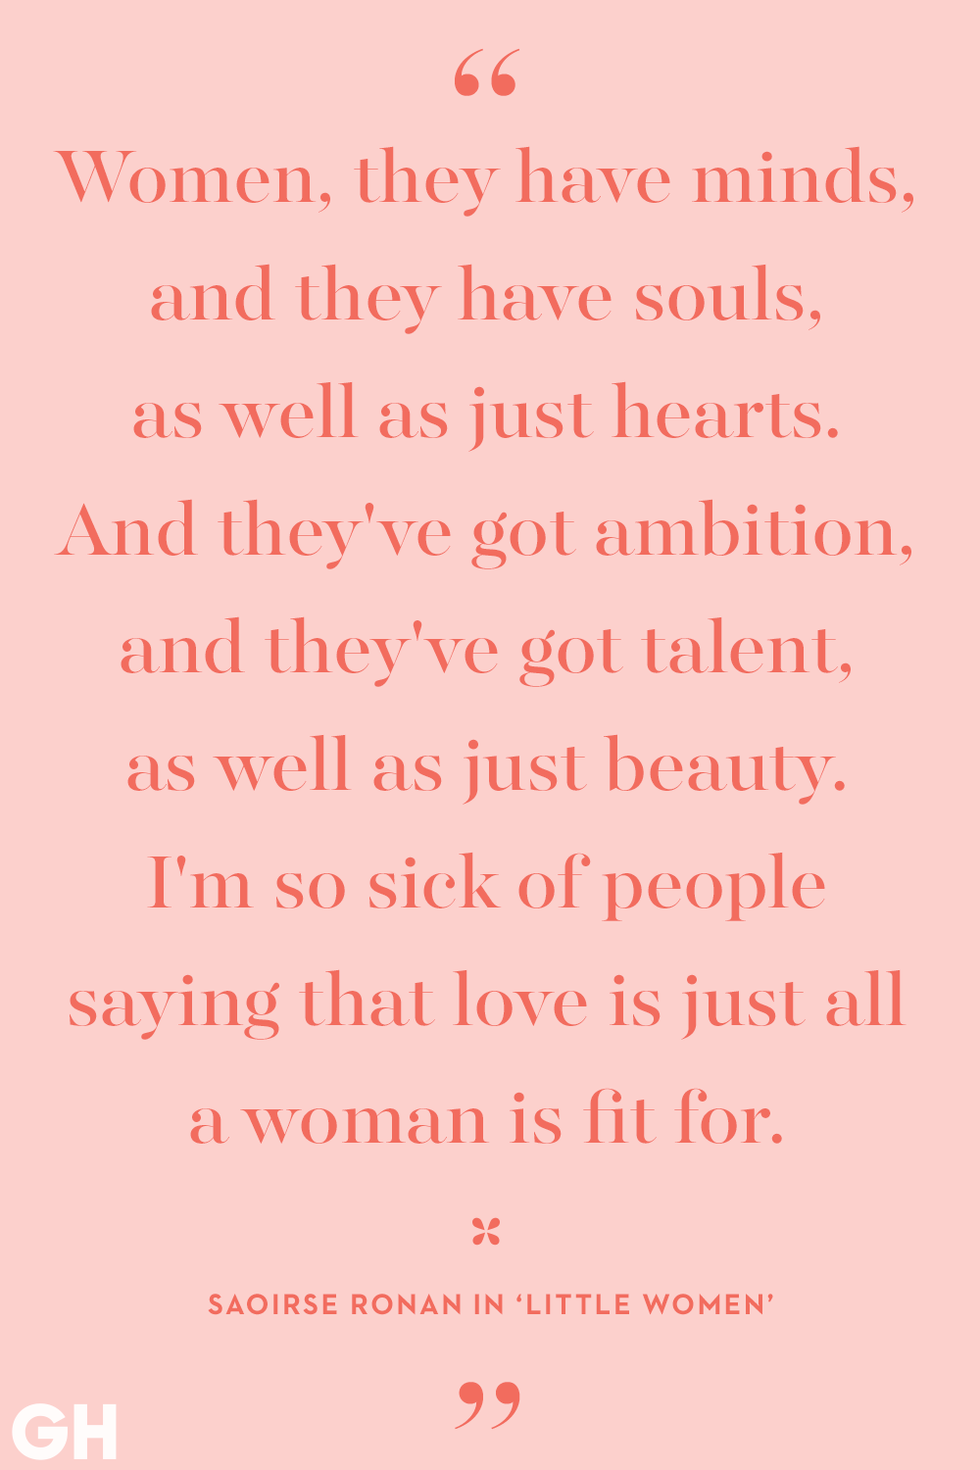 16 Independent Women Quotes by Powerful Women, by Goodlives